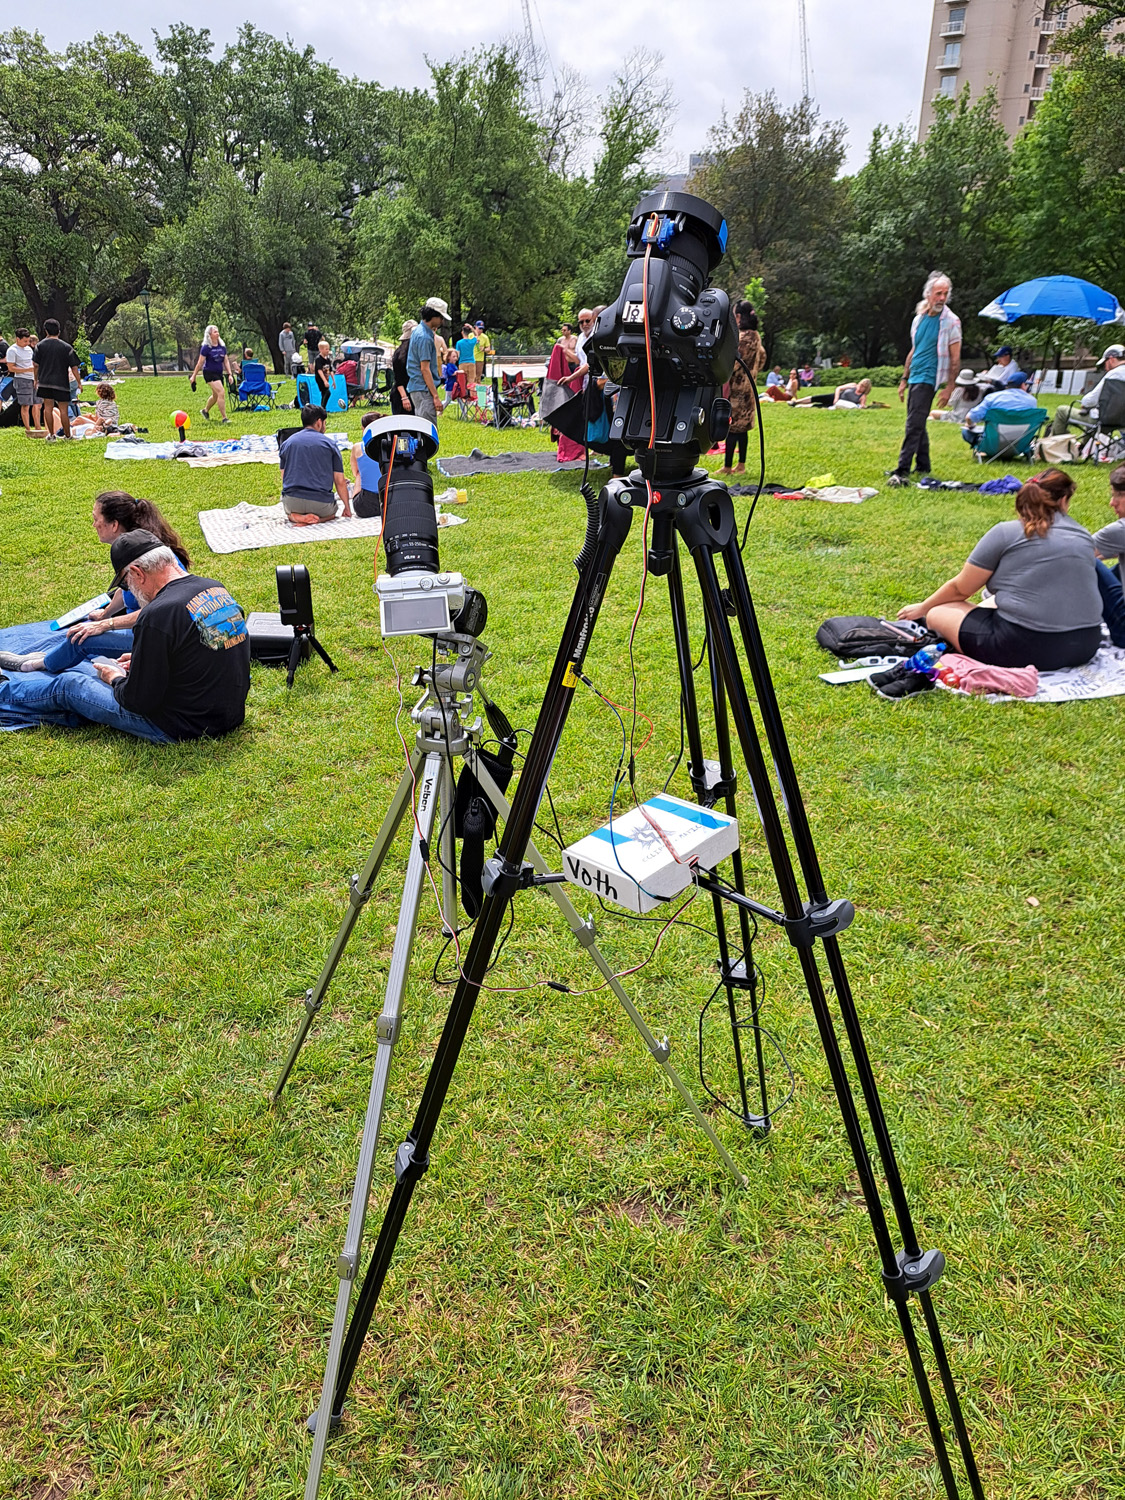 Two tripods and cameras, each with 3D printed solar filters and cables streaming into a white cardboard box. Grassy field with people in background.